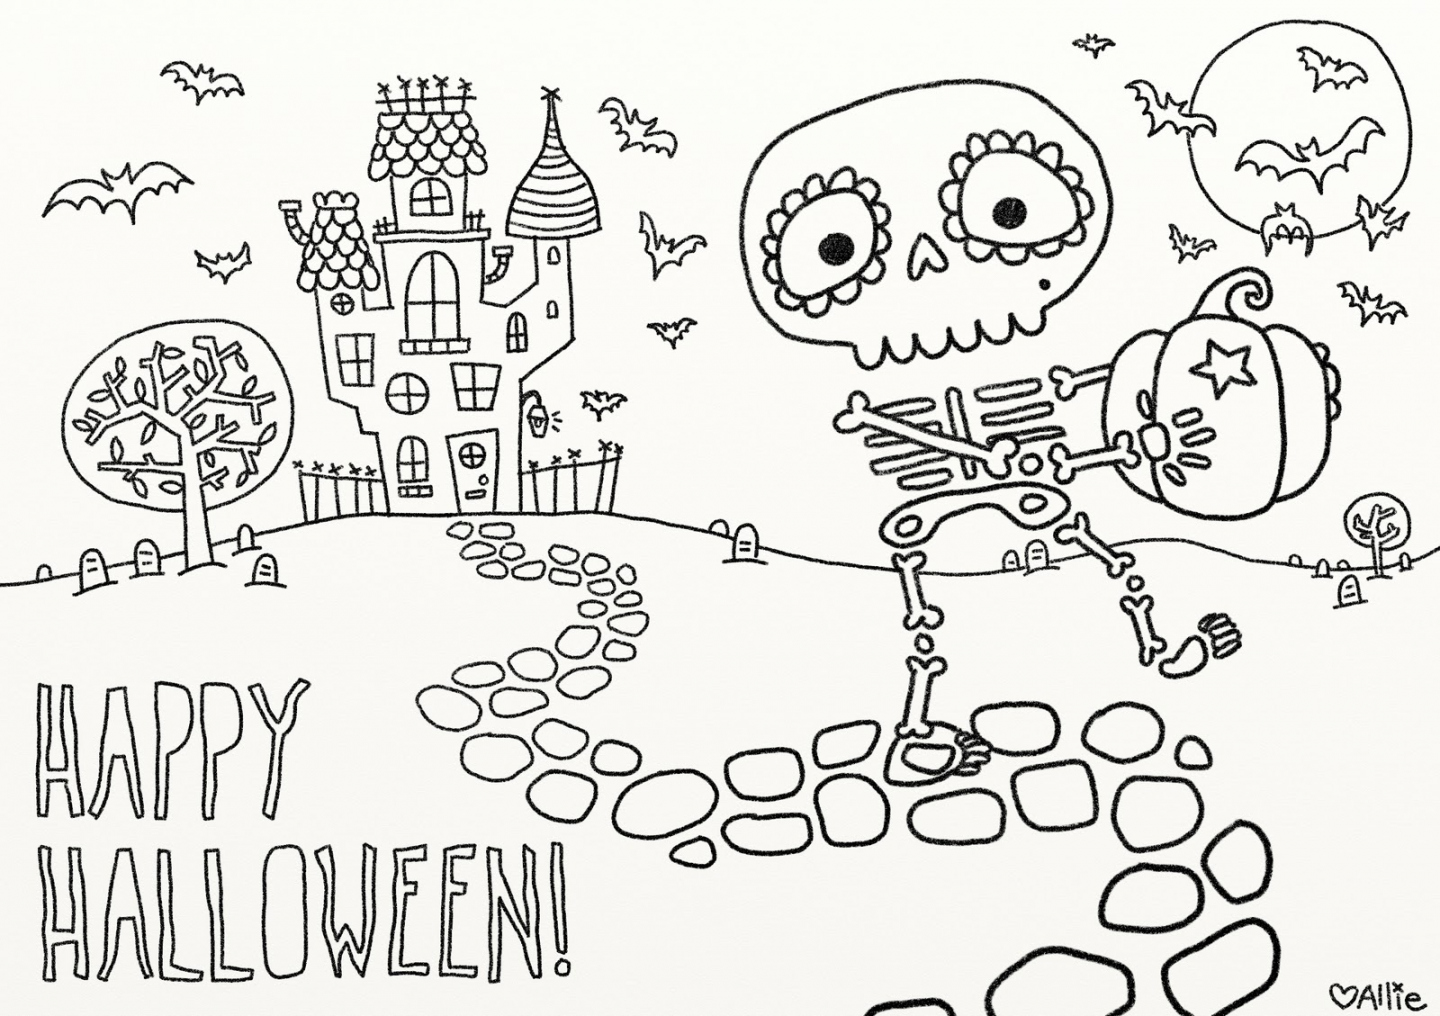 fun free printable Halloween coloring pages - FREE Printables - Free Printable Halloween Images